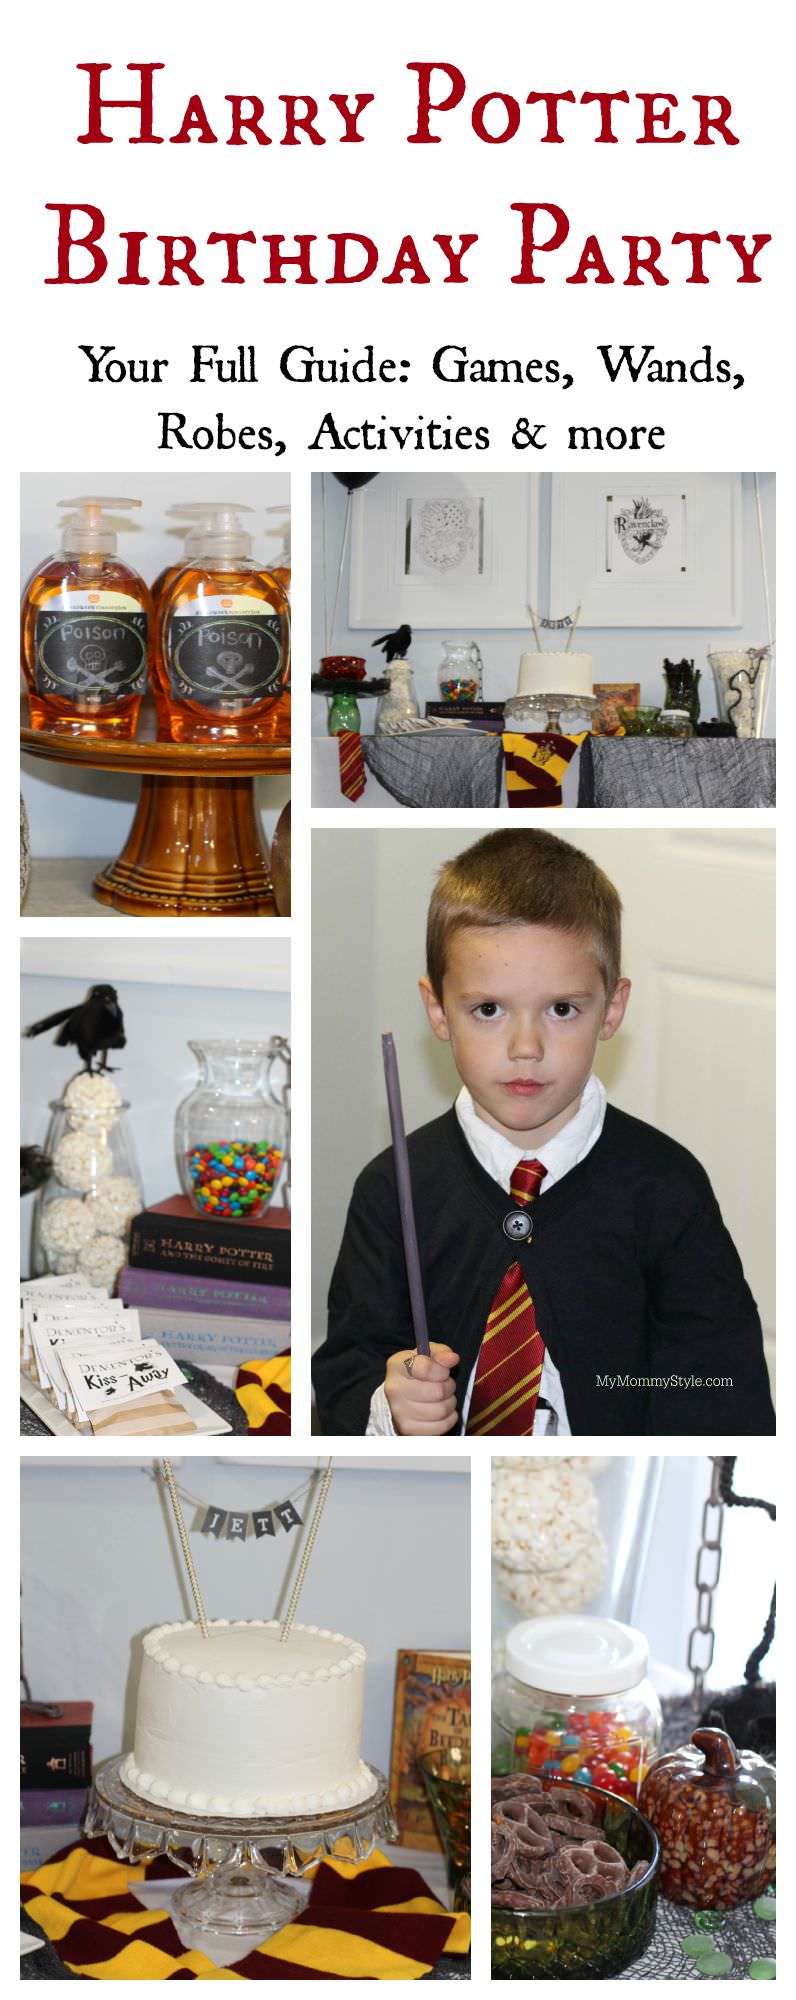 Harry Potter / Wedding Check out this Insane Harry Potter Dessert Table!